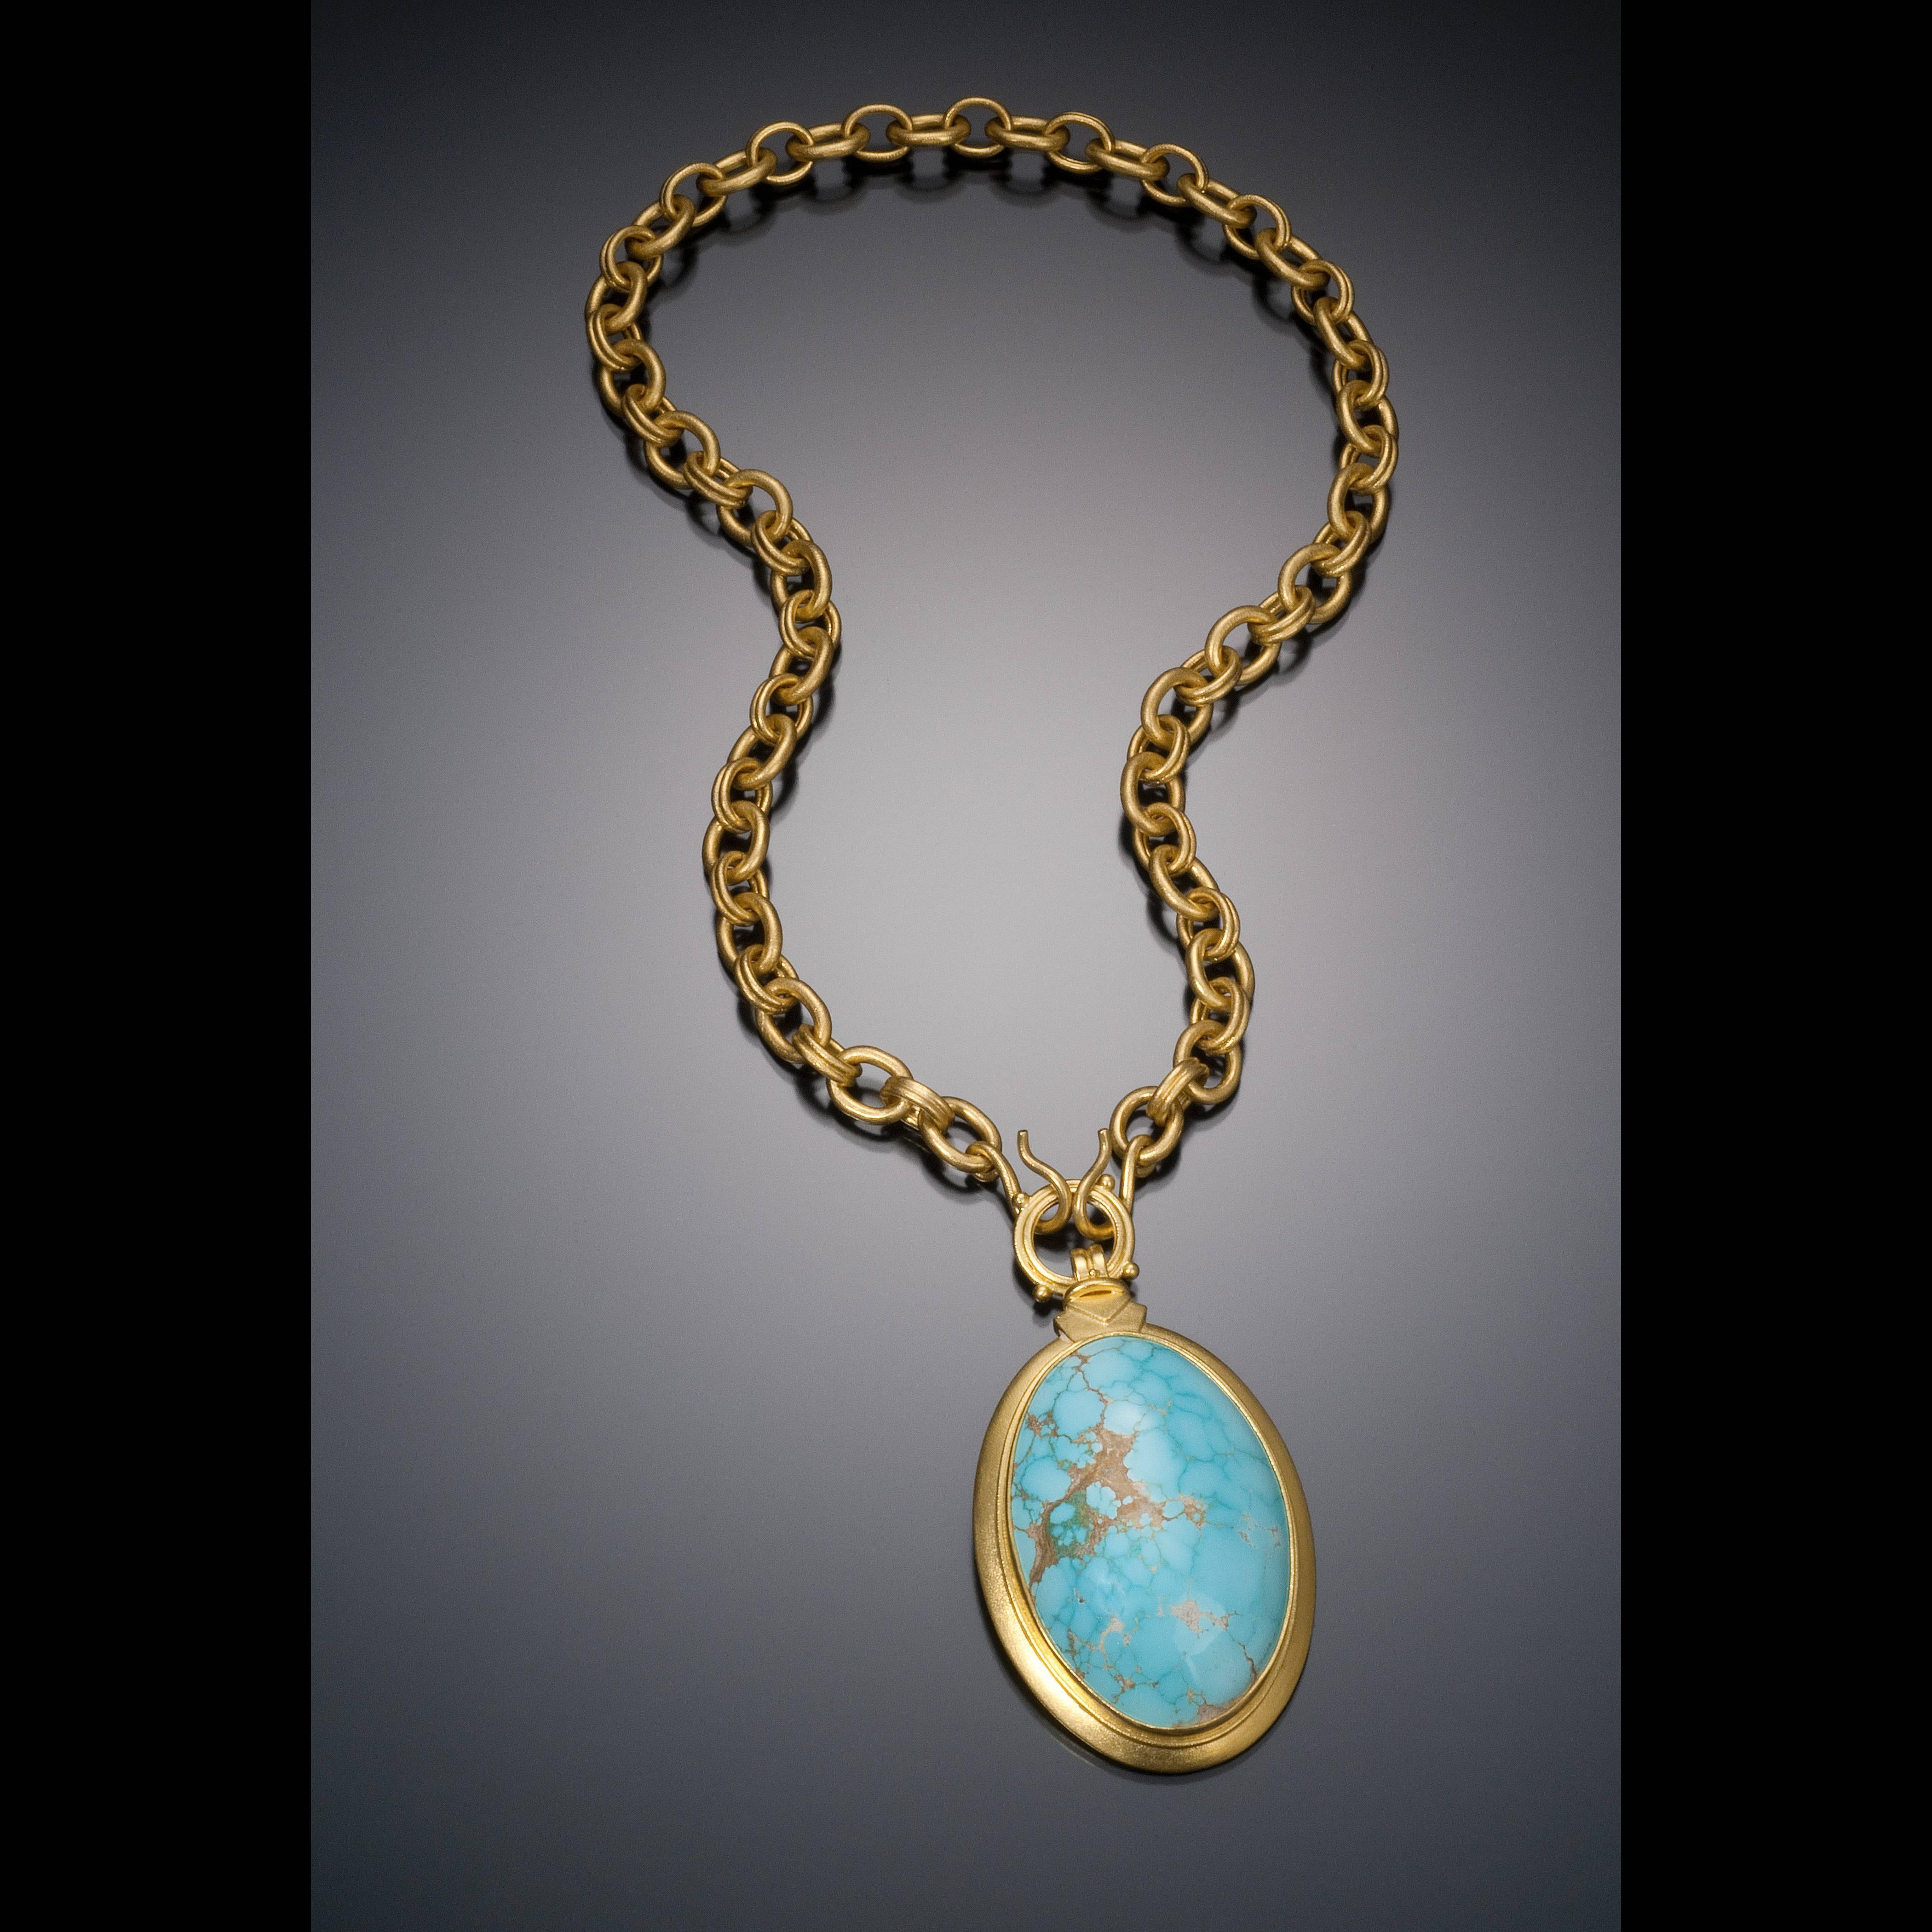 Large natural Turquoise from the Southwest United States, set in 22kt Gold, with handmade 22kt chain. Natural (untreated, not dyed) Turquoise of this size and quality is extremely rare. 

* Each piece is designed and crafted entirely by hand in